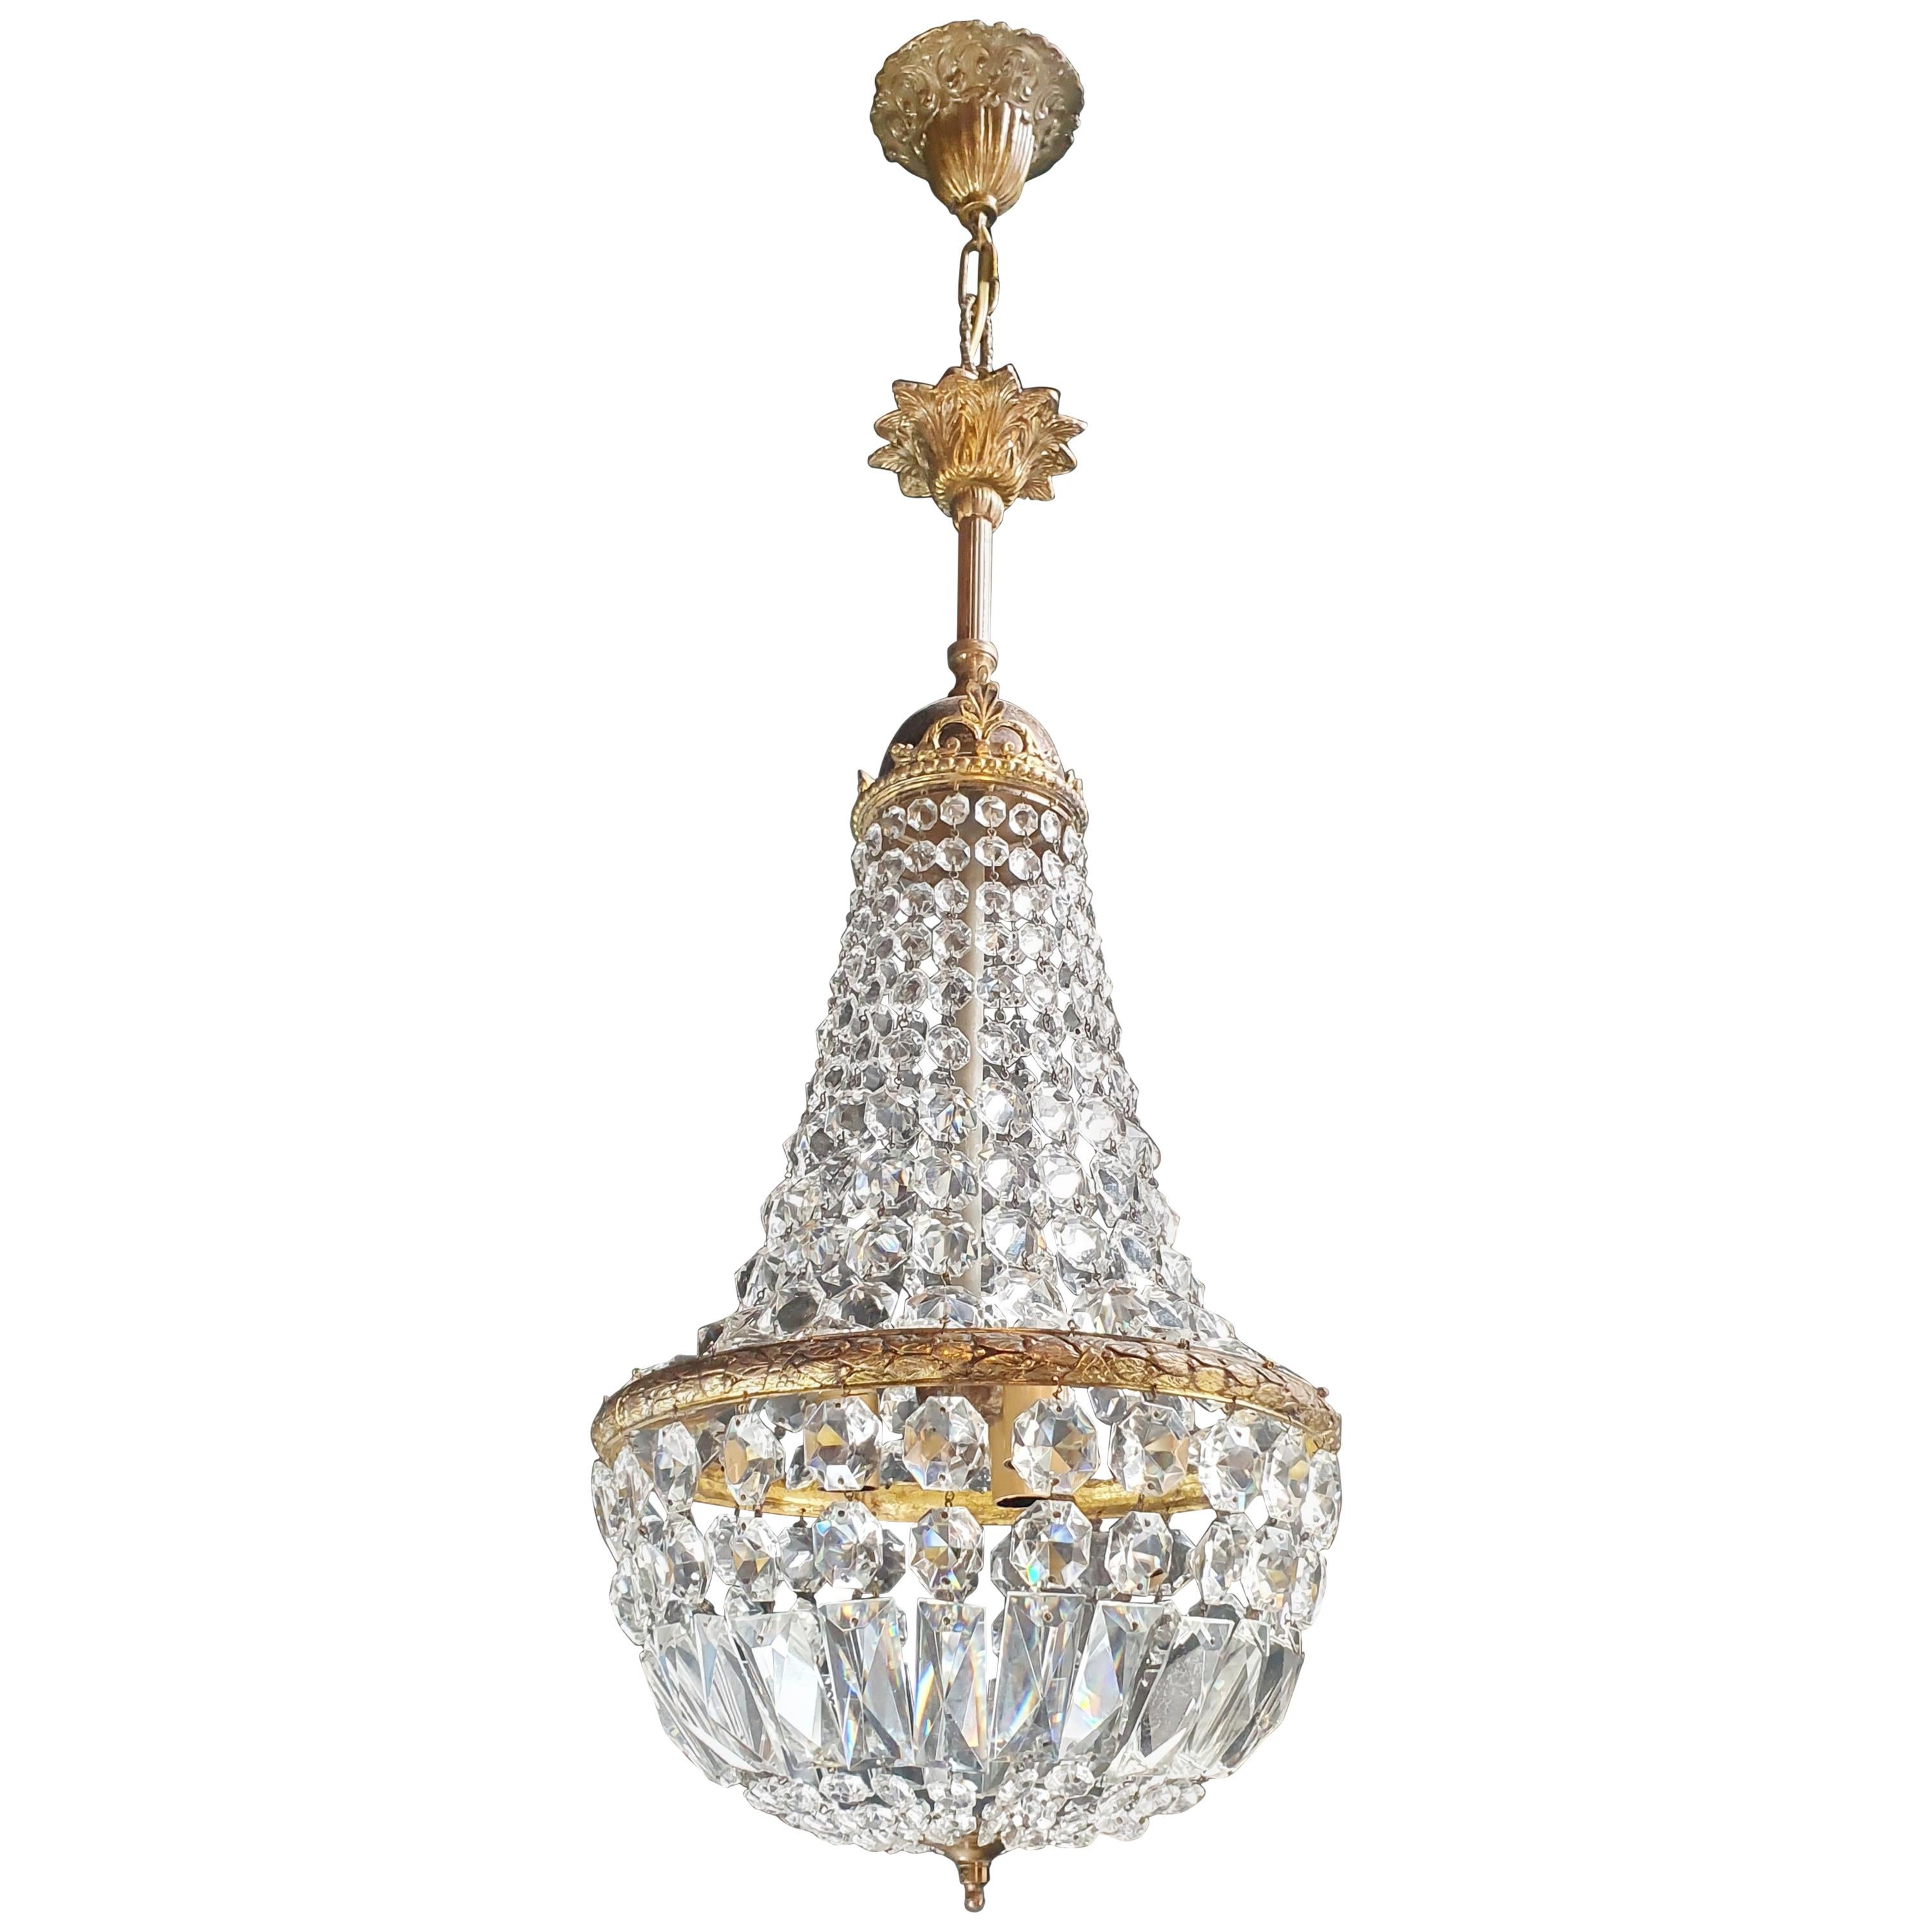 Fine Brass Empire Sac a Pearl Chandelier Crystal Lustre Ceiling Lamp Antique